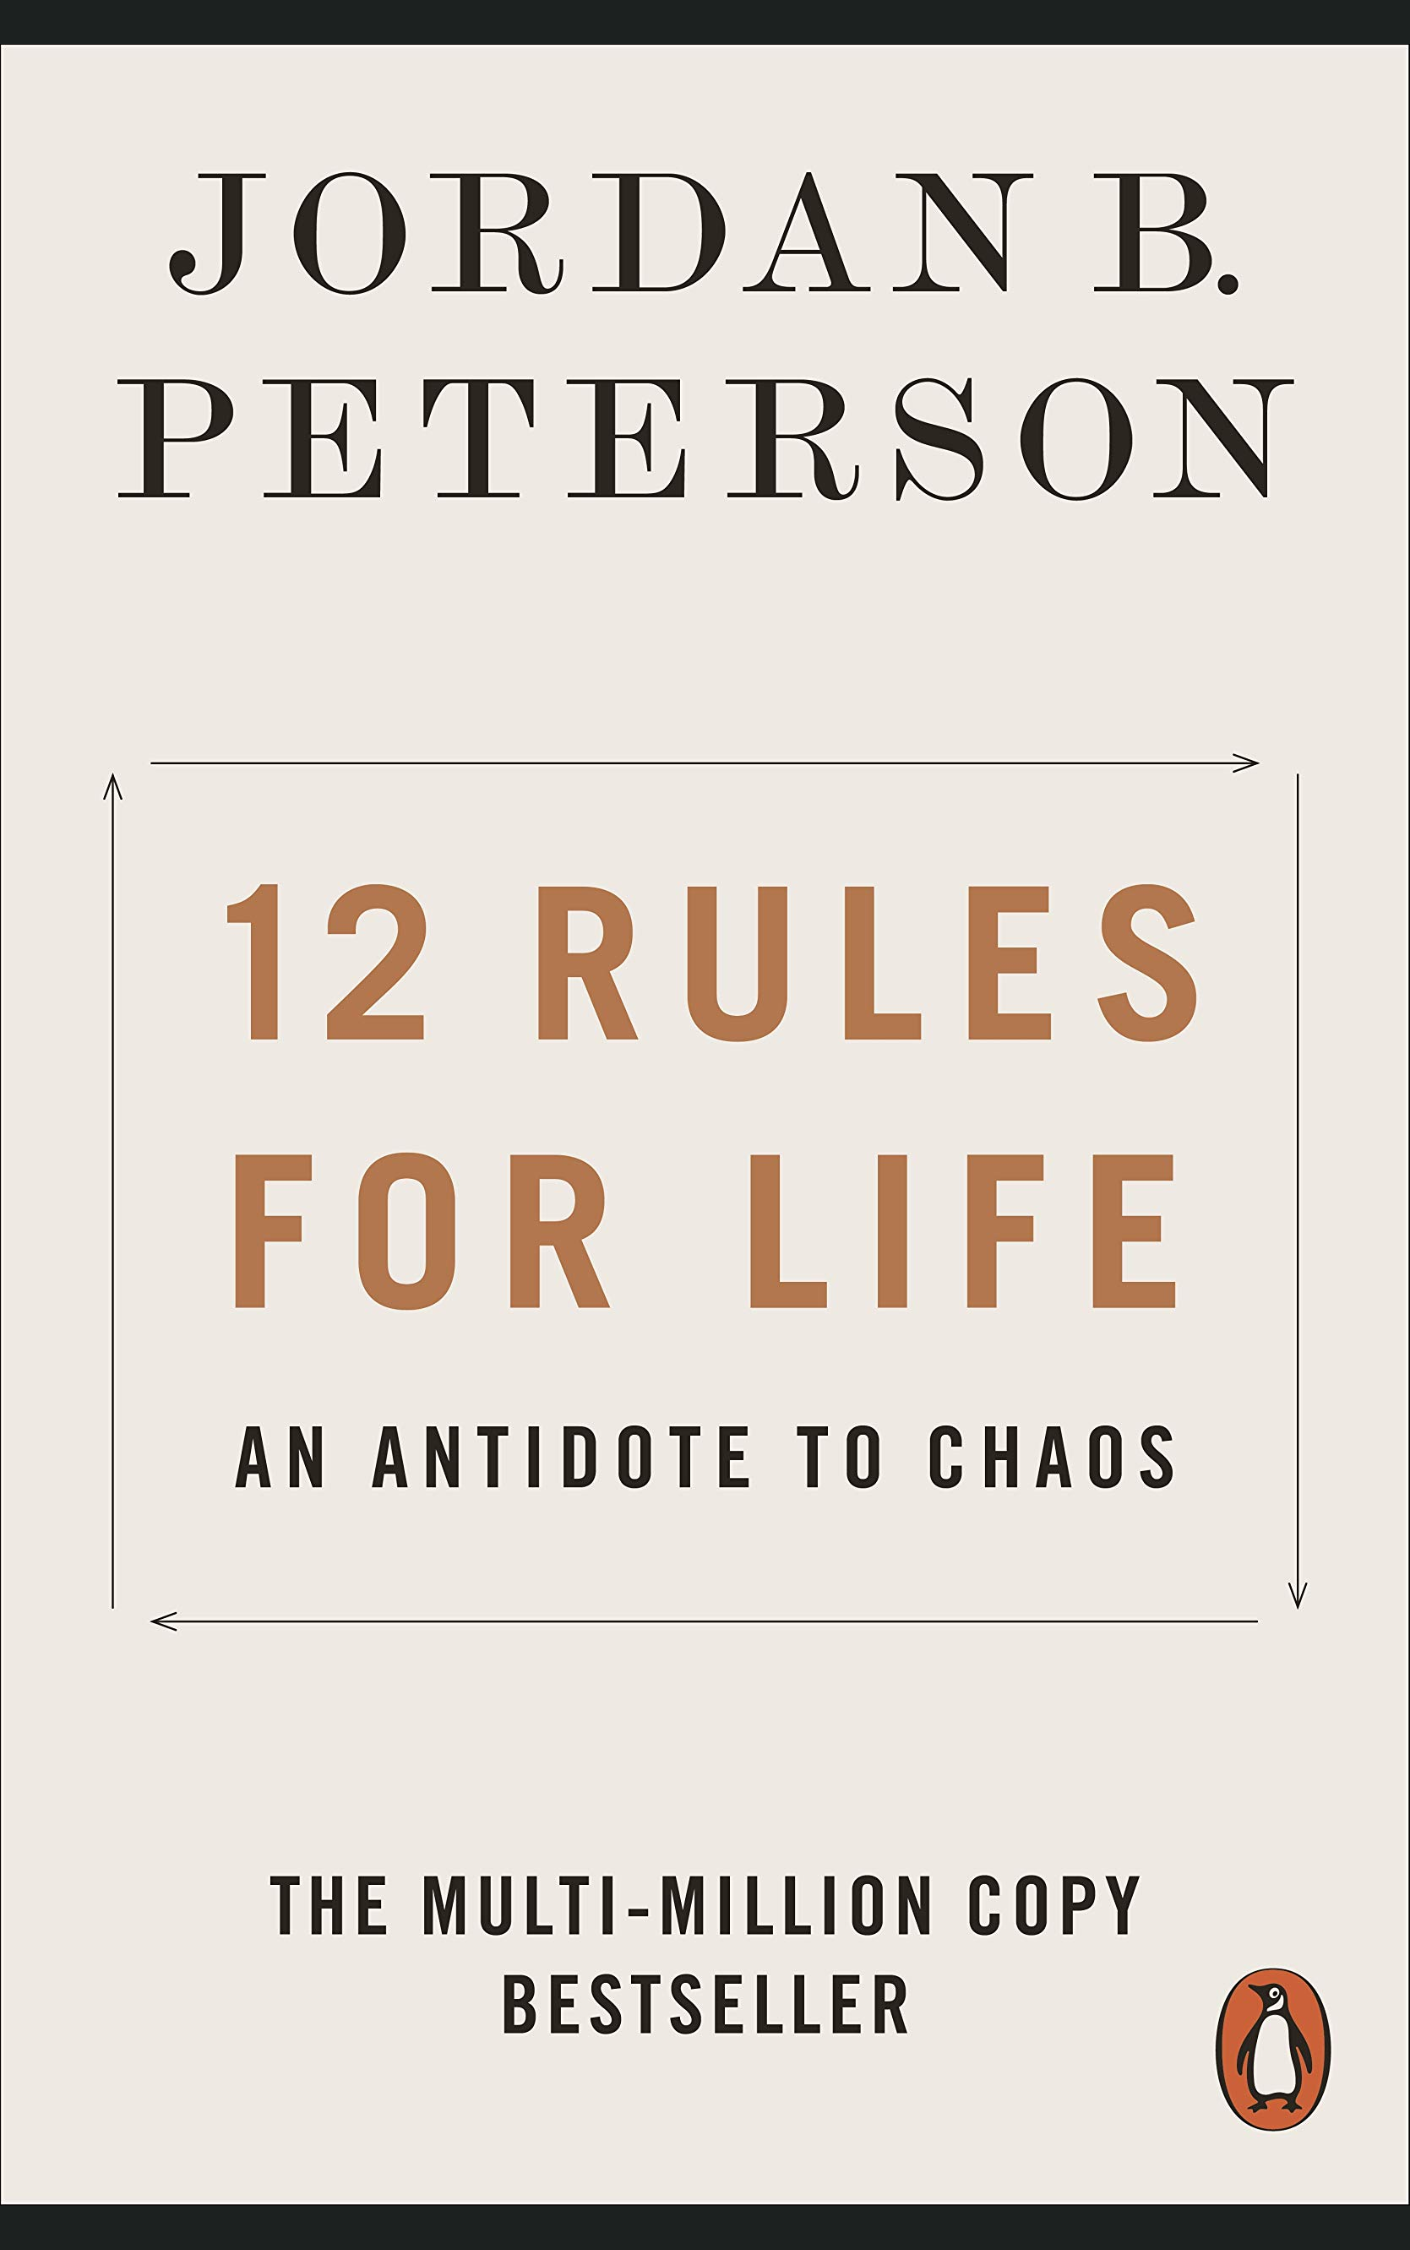 12 RULES FOR LIFE by JORDAN B PETERSON